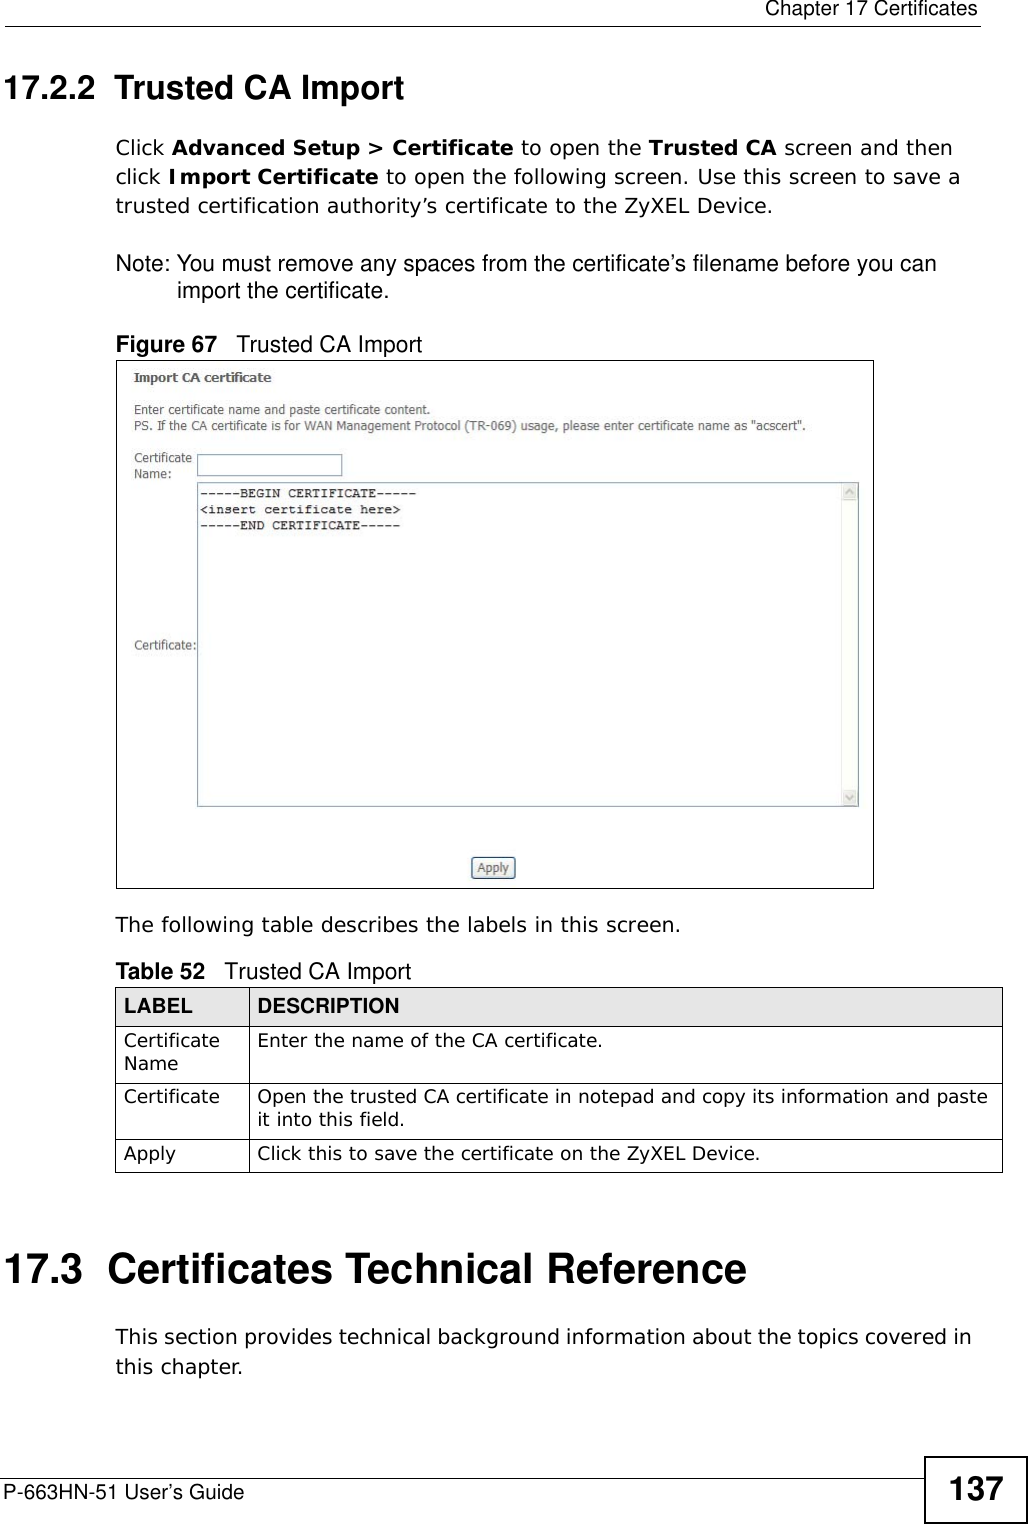  Chapter 17 CertificatesP-663HN-51 User’s Guide 13717.2.2  Trusted CA Import  Click Advanced Setup &gt; Certificate to open the Trusted CA screen and then click Import Certificate to open the following screen. Use this screen to save a trusted certification authority’s certificate to the ZyXEL Device. Note: You must remove any spaces from the certificate’s filename before you can import the certificate.Figure 67   Trusted CA ImportThe following table describes the labels in this screen.17.3  Certificates Technical ReferenceThis section provides technical background information about the topics covered in this chapter.Table 52   Trusted CA ImportLABEL DESCRIPTIONCertificate Name Enter the name of the CA certificate.Certificate Open the trusted CA certificate in notepad and copy its information and paste it into this field. Apply Click this to save the certificate on the ZyXEL Device.